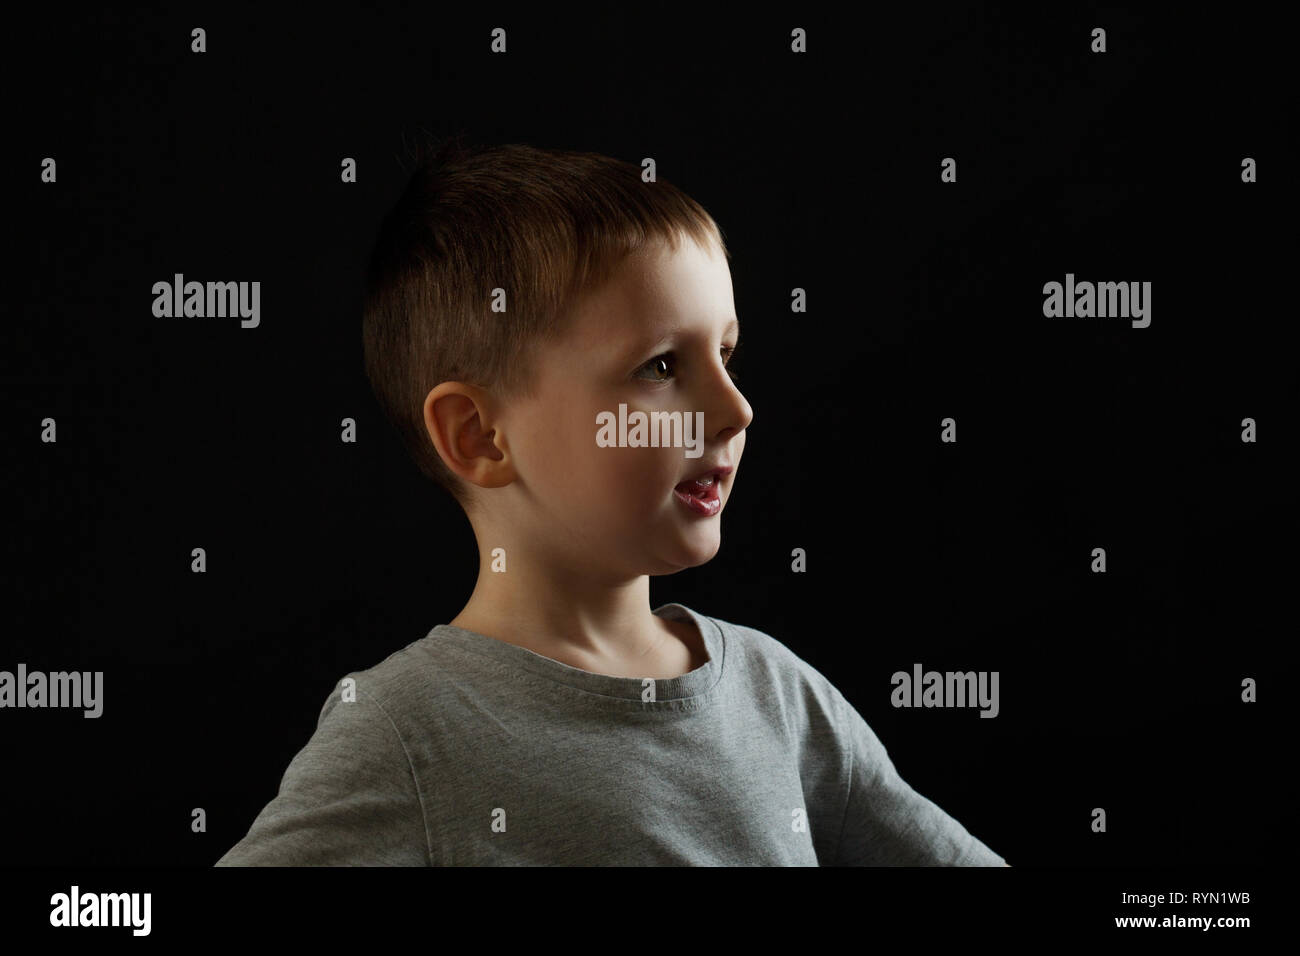 Portrait of a child in profile on a black background. Boy looking forward, concept, copy space right Stock Photo